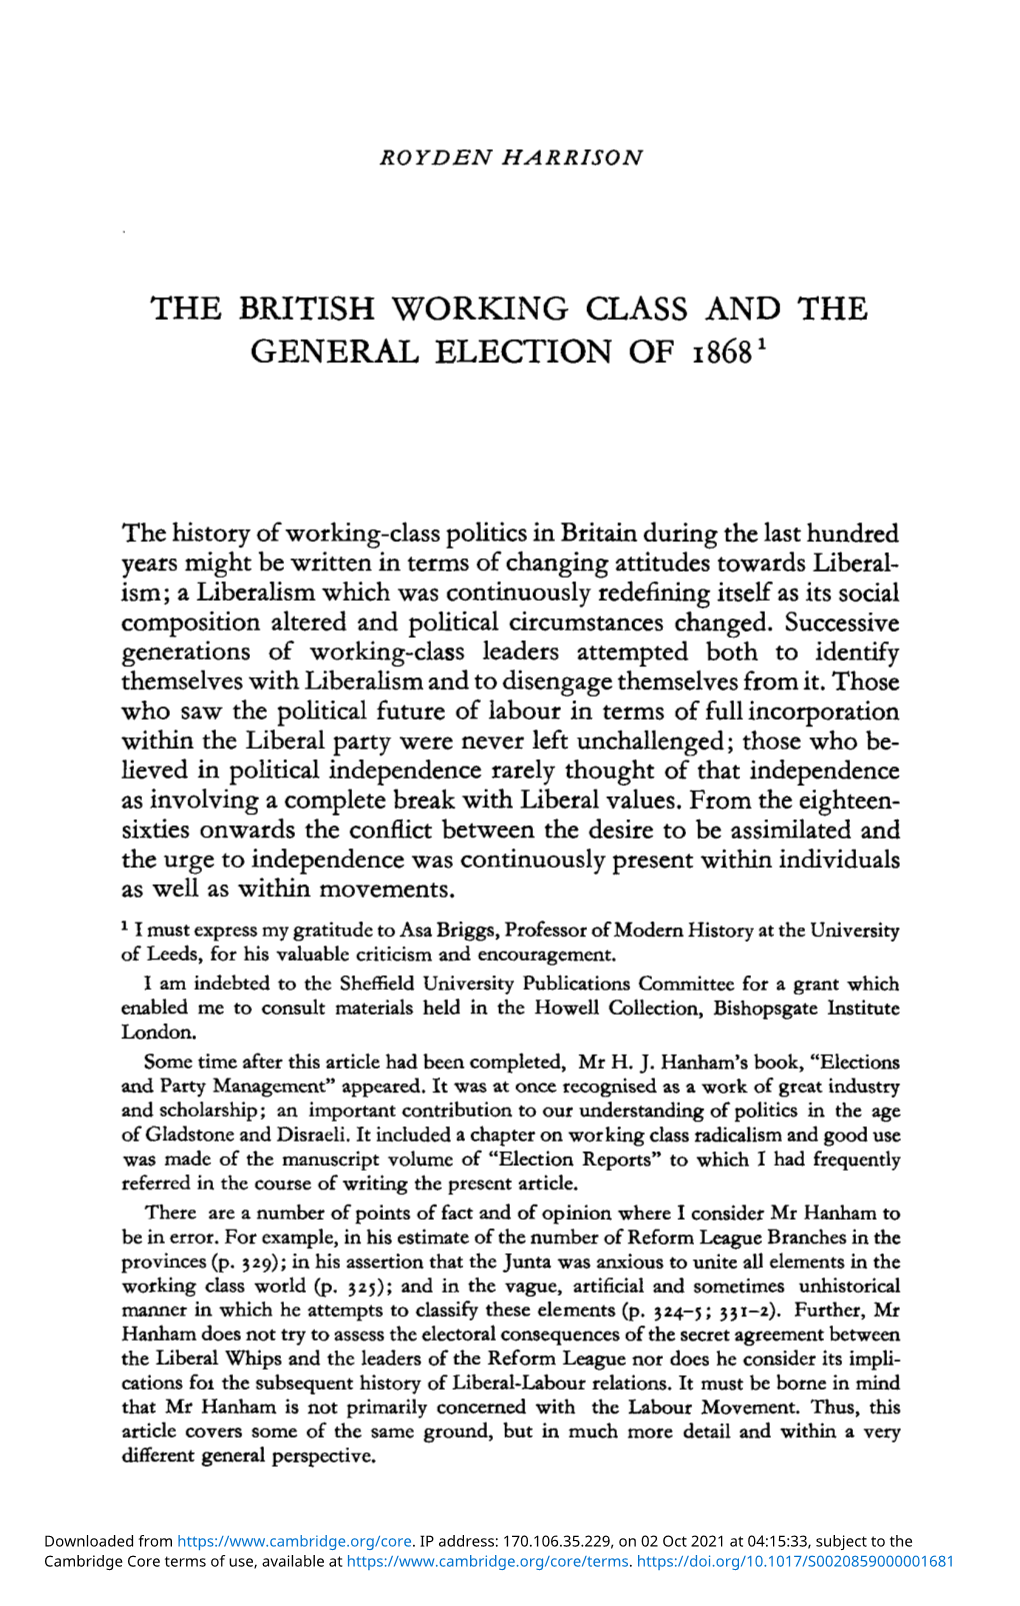 The British Working Class and the General Election of 1868 1